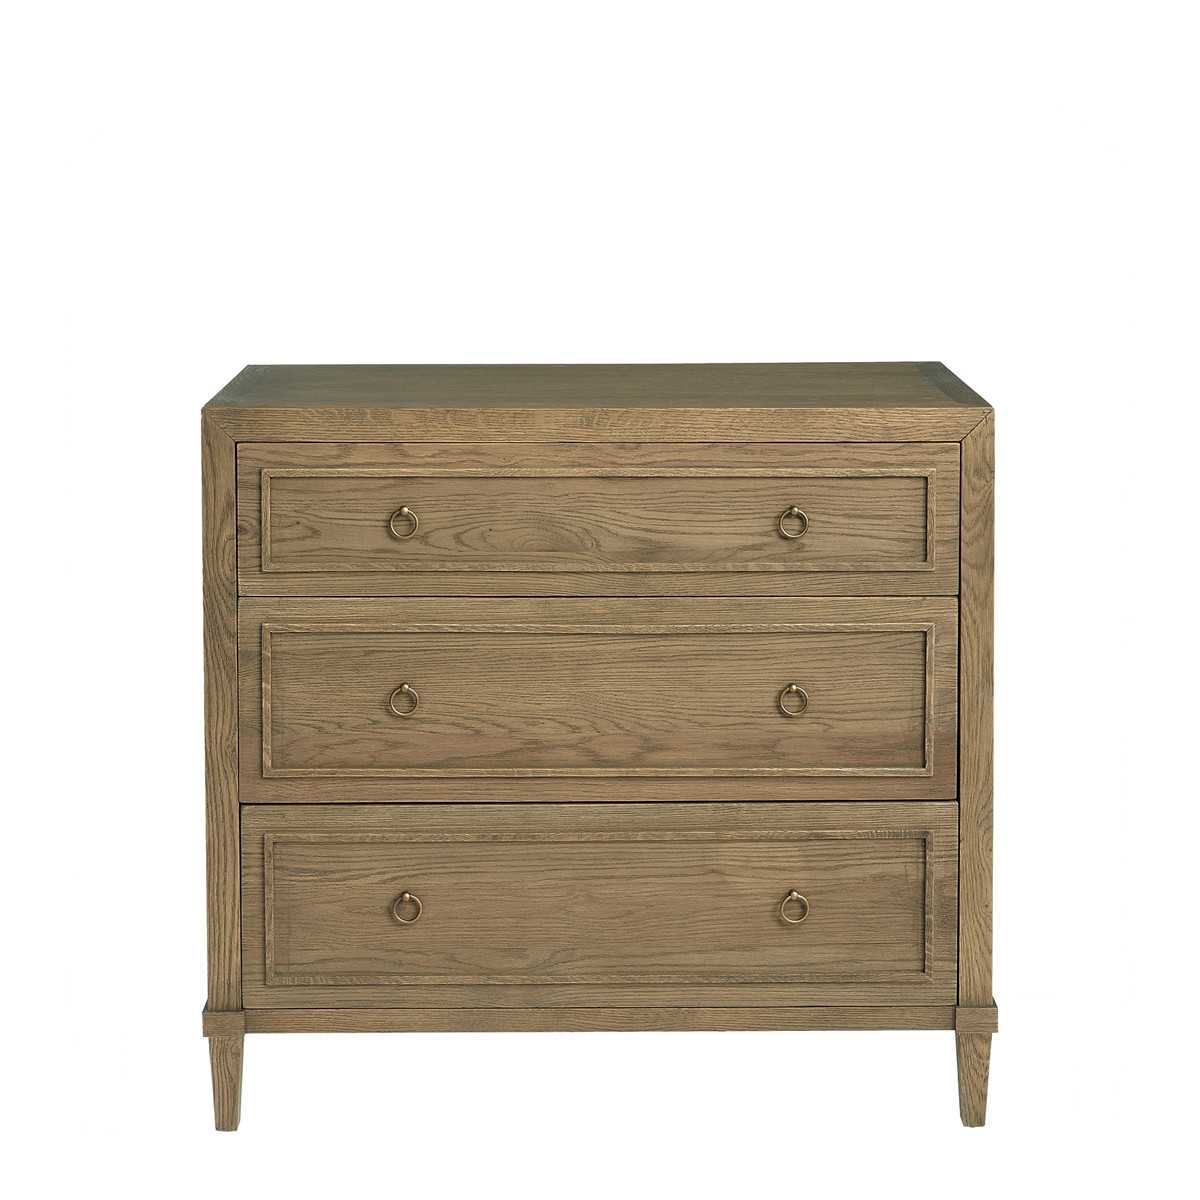 ARIANNE chest of drawers